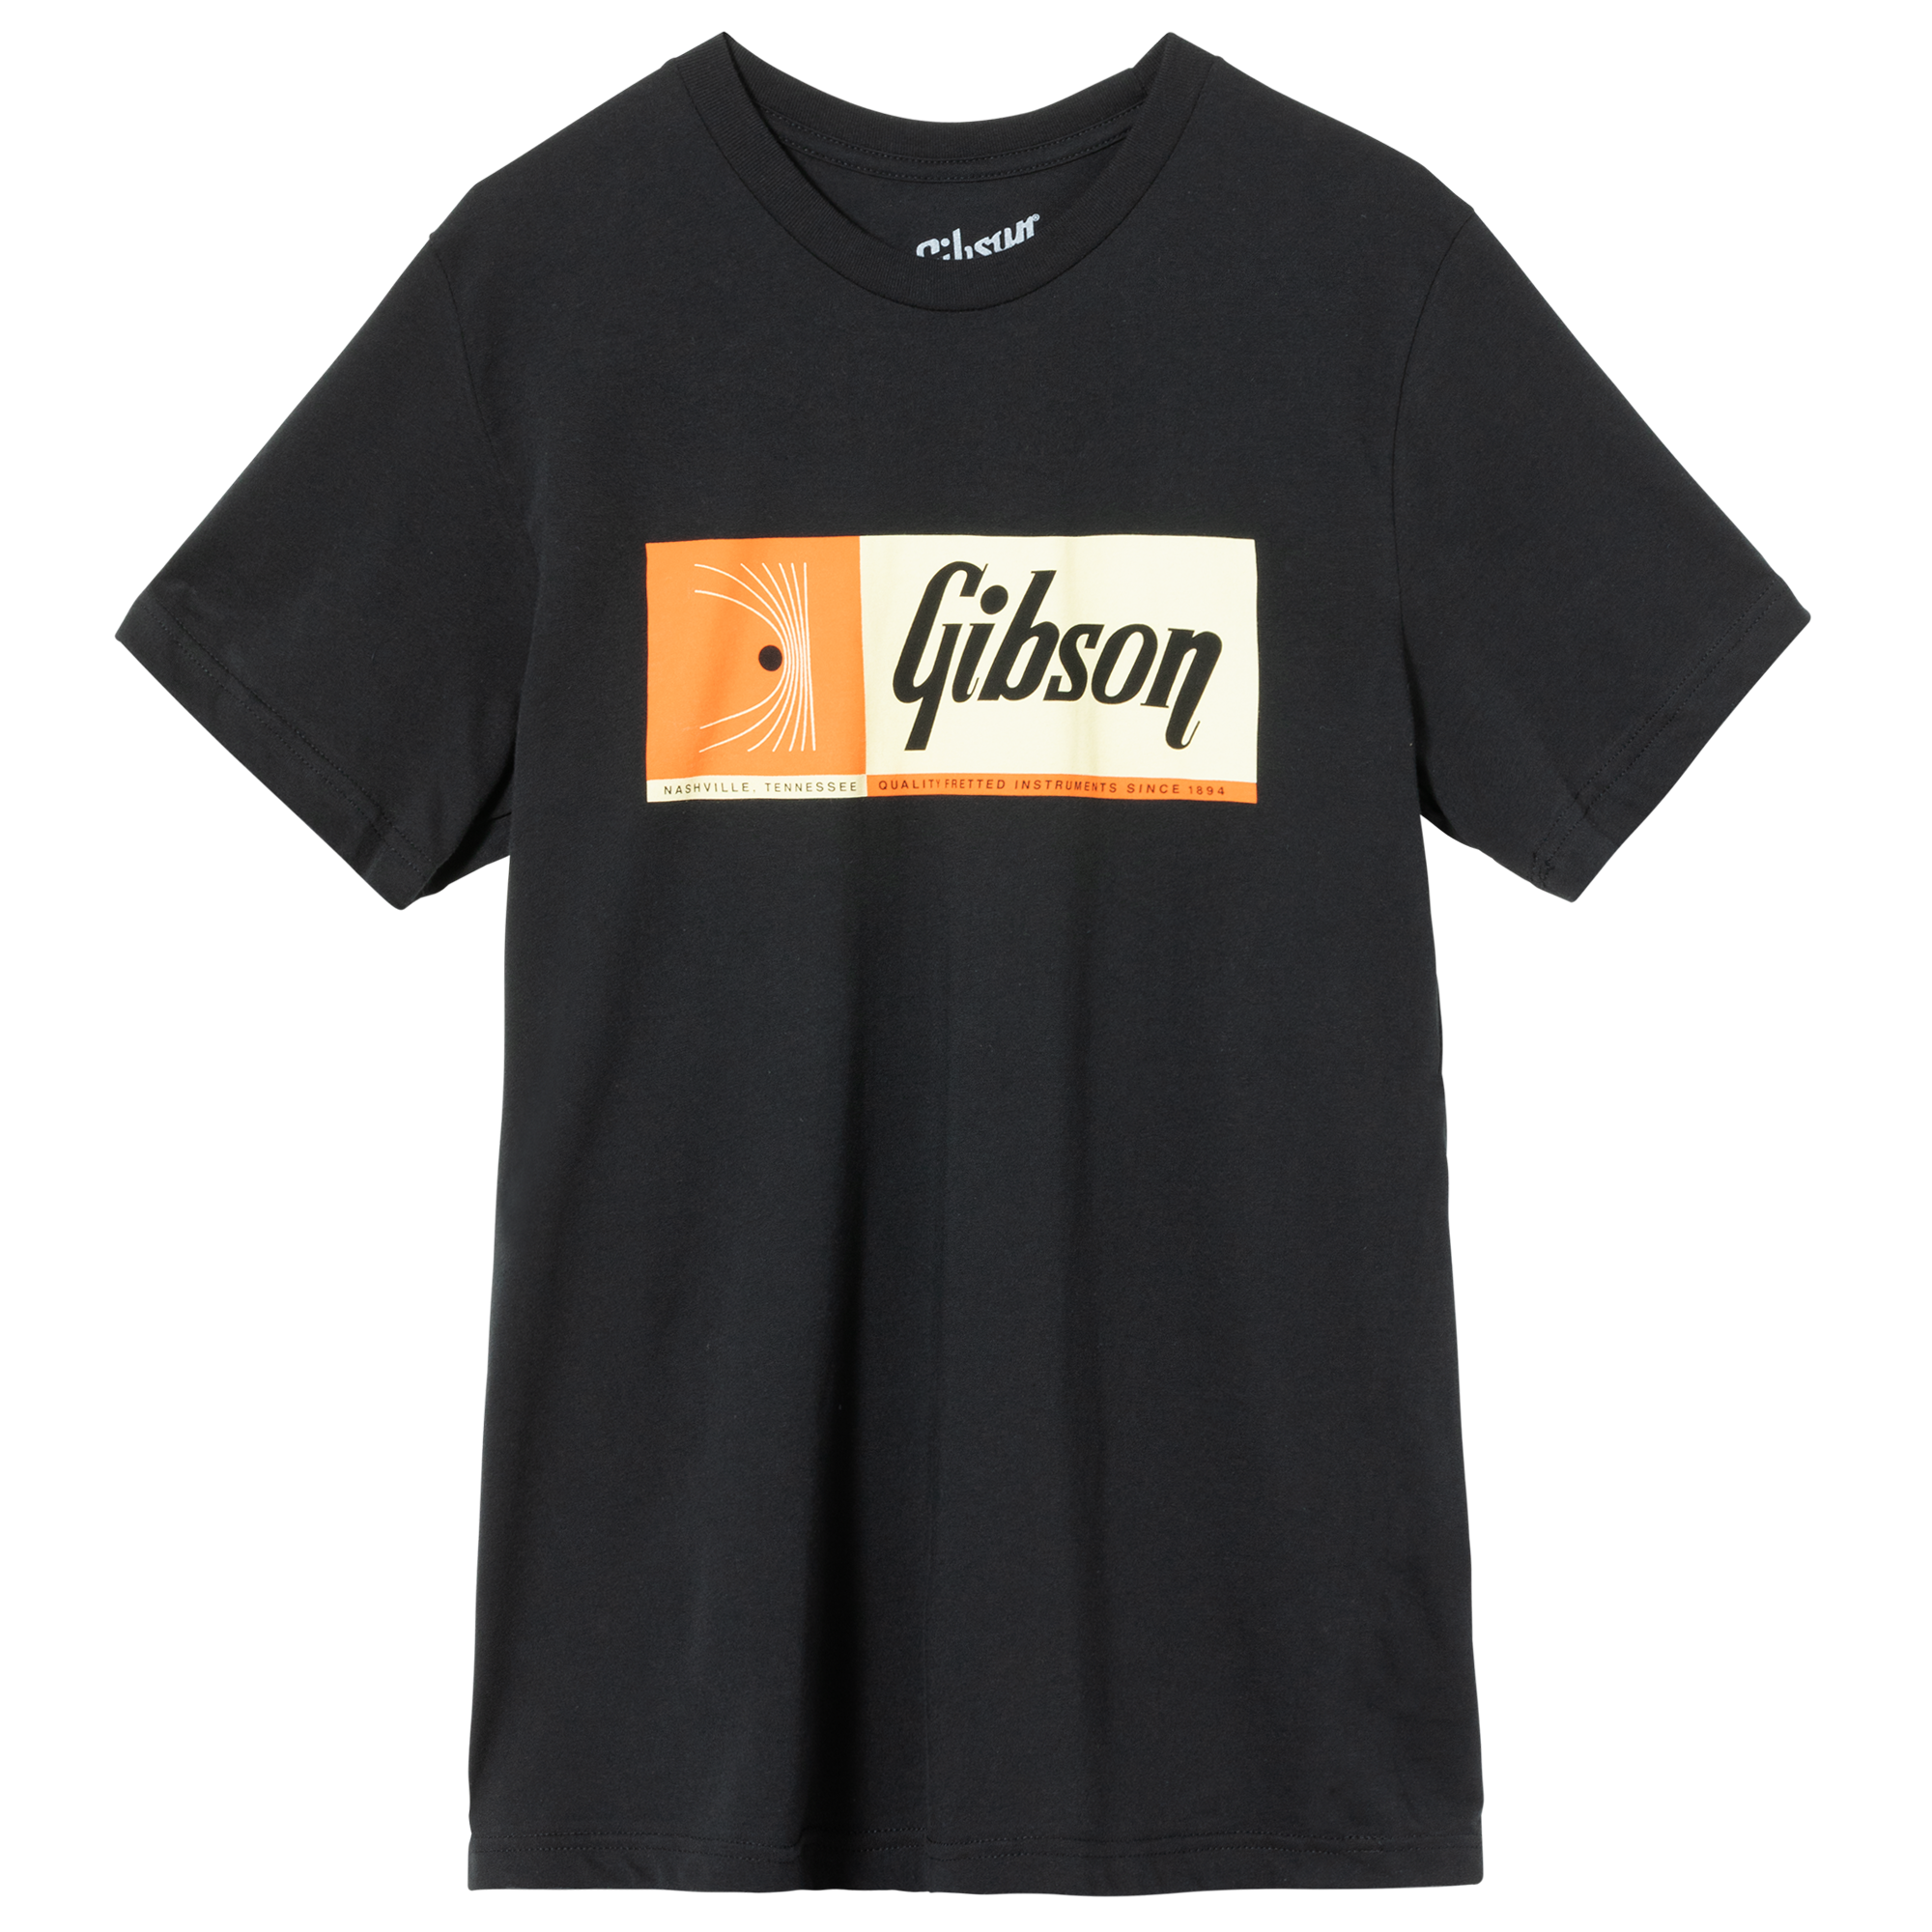 GIBSON ACCESSORIES QUALITY FRETTED INSTRUMENTS T-SHIRT - VINTAGE BLACK (GA-TEE-QFI-BLK)